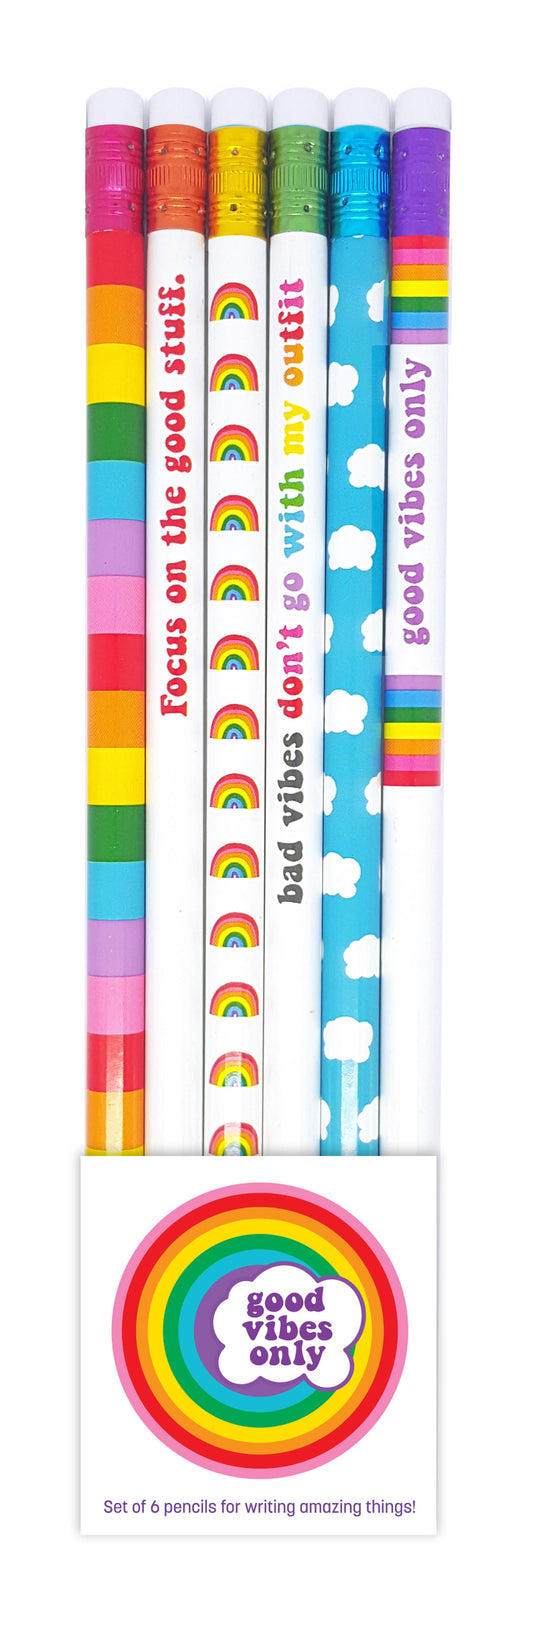 Tomfoolery Toys | Good Vibes Only Pencil Set